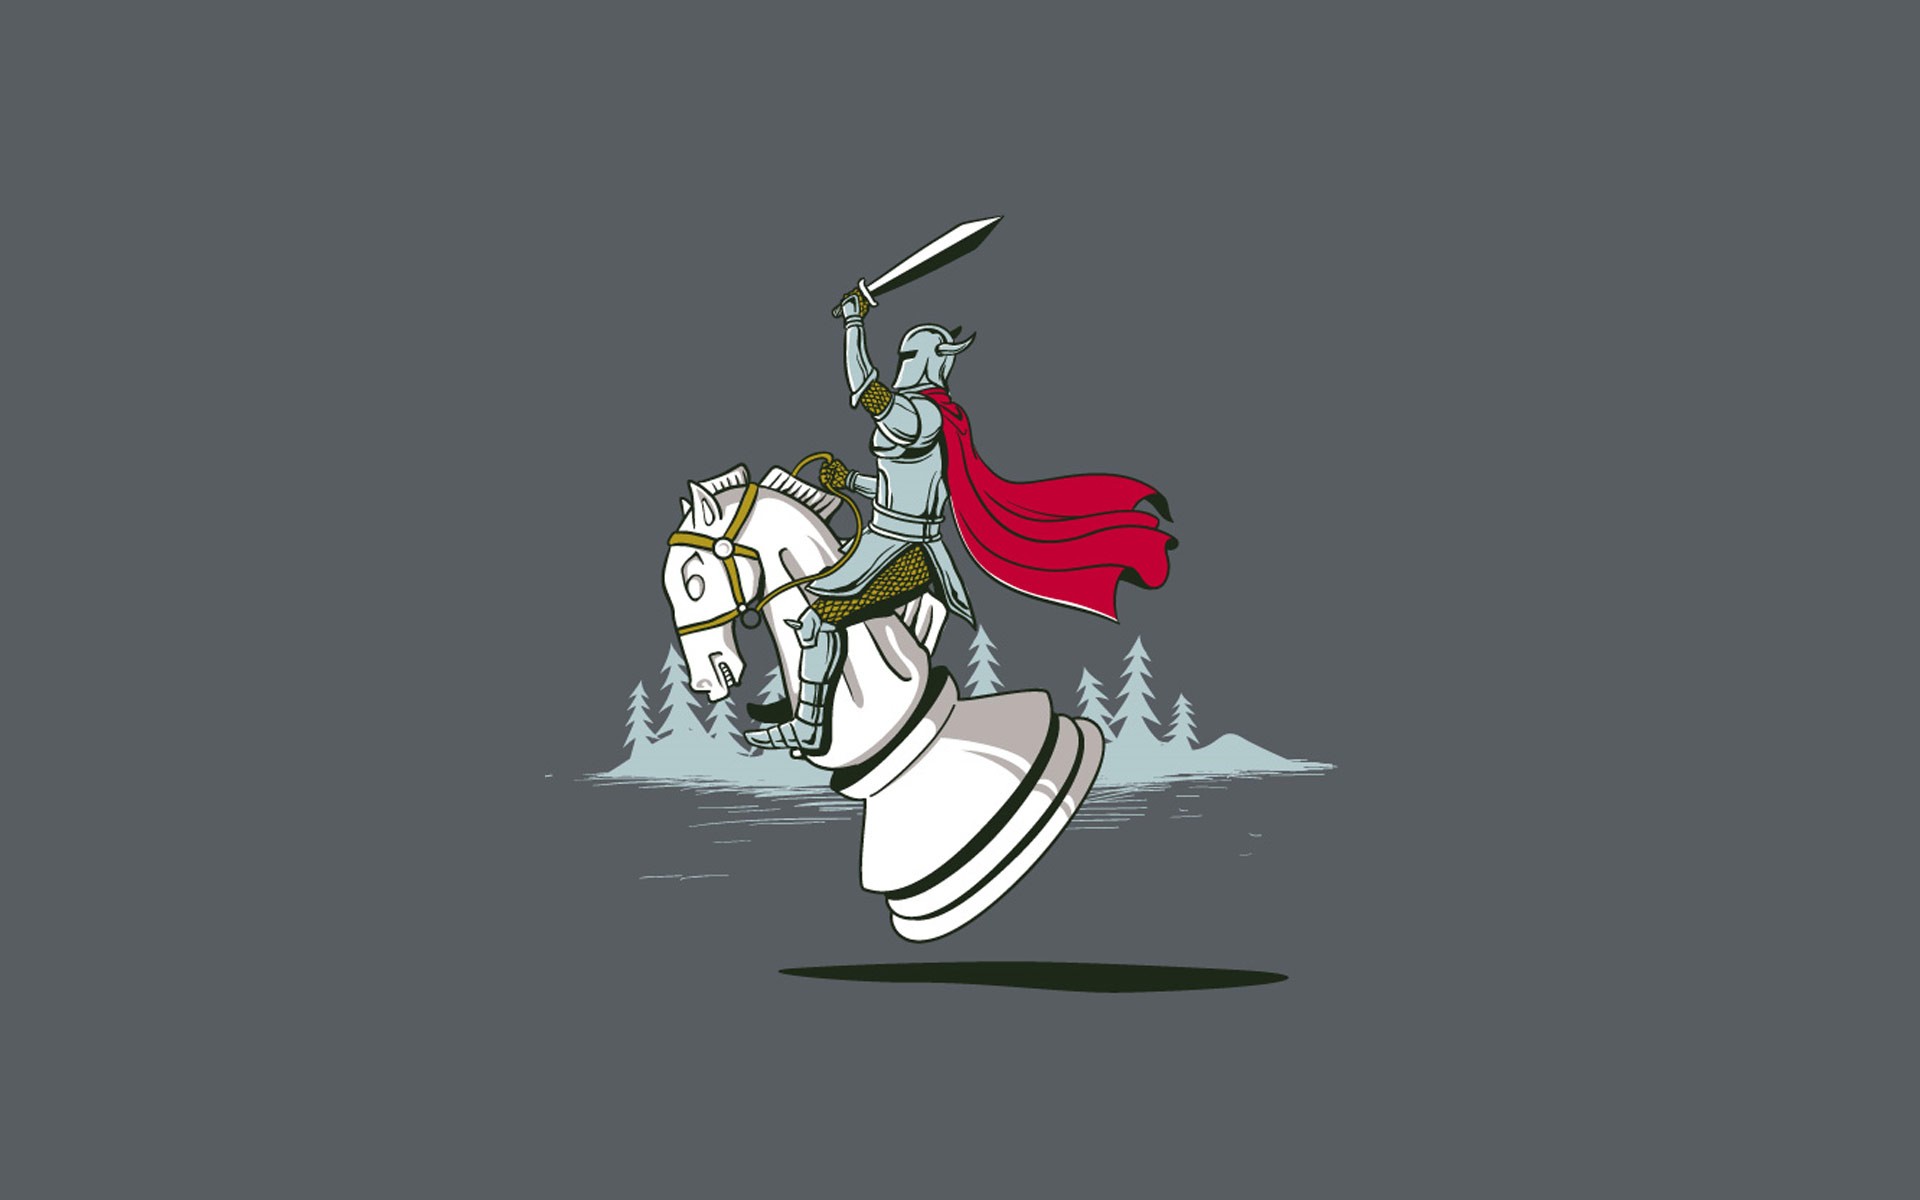 General 1920x1200 knight minimalism chess humor gray background gray board games simple background artwork